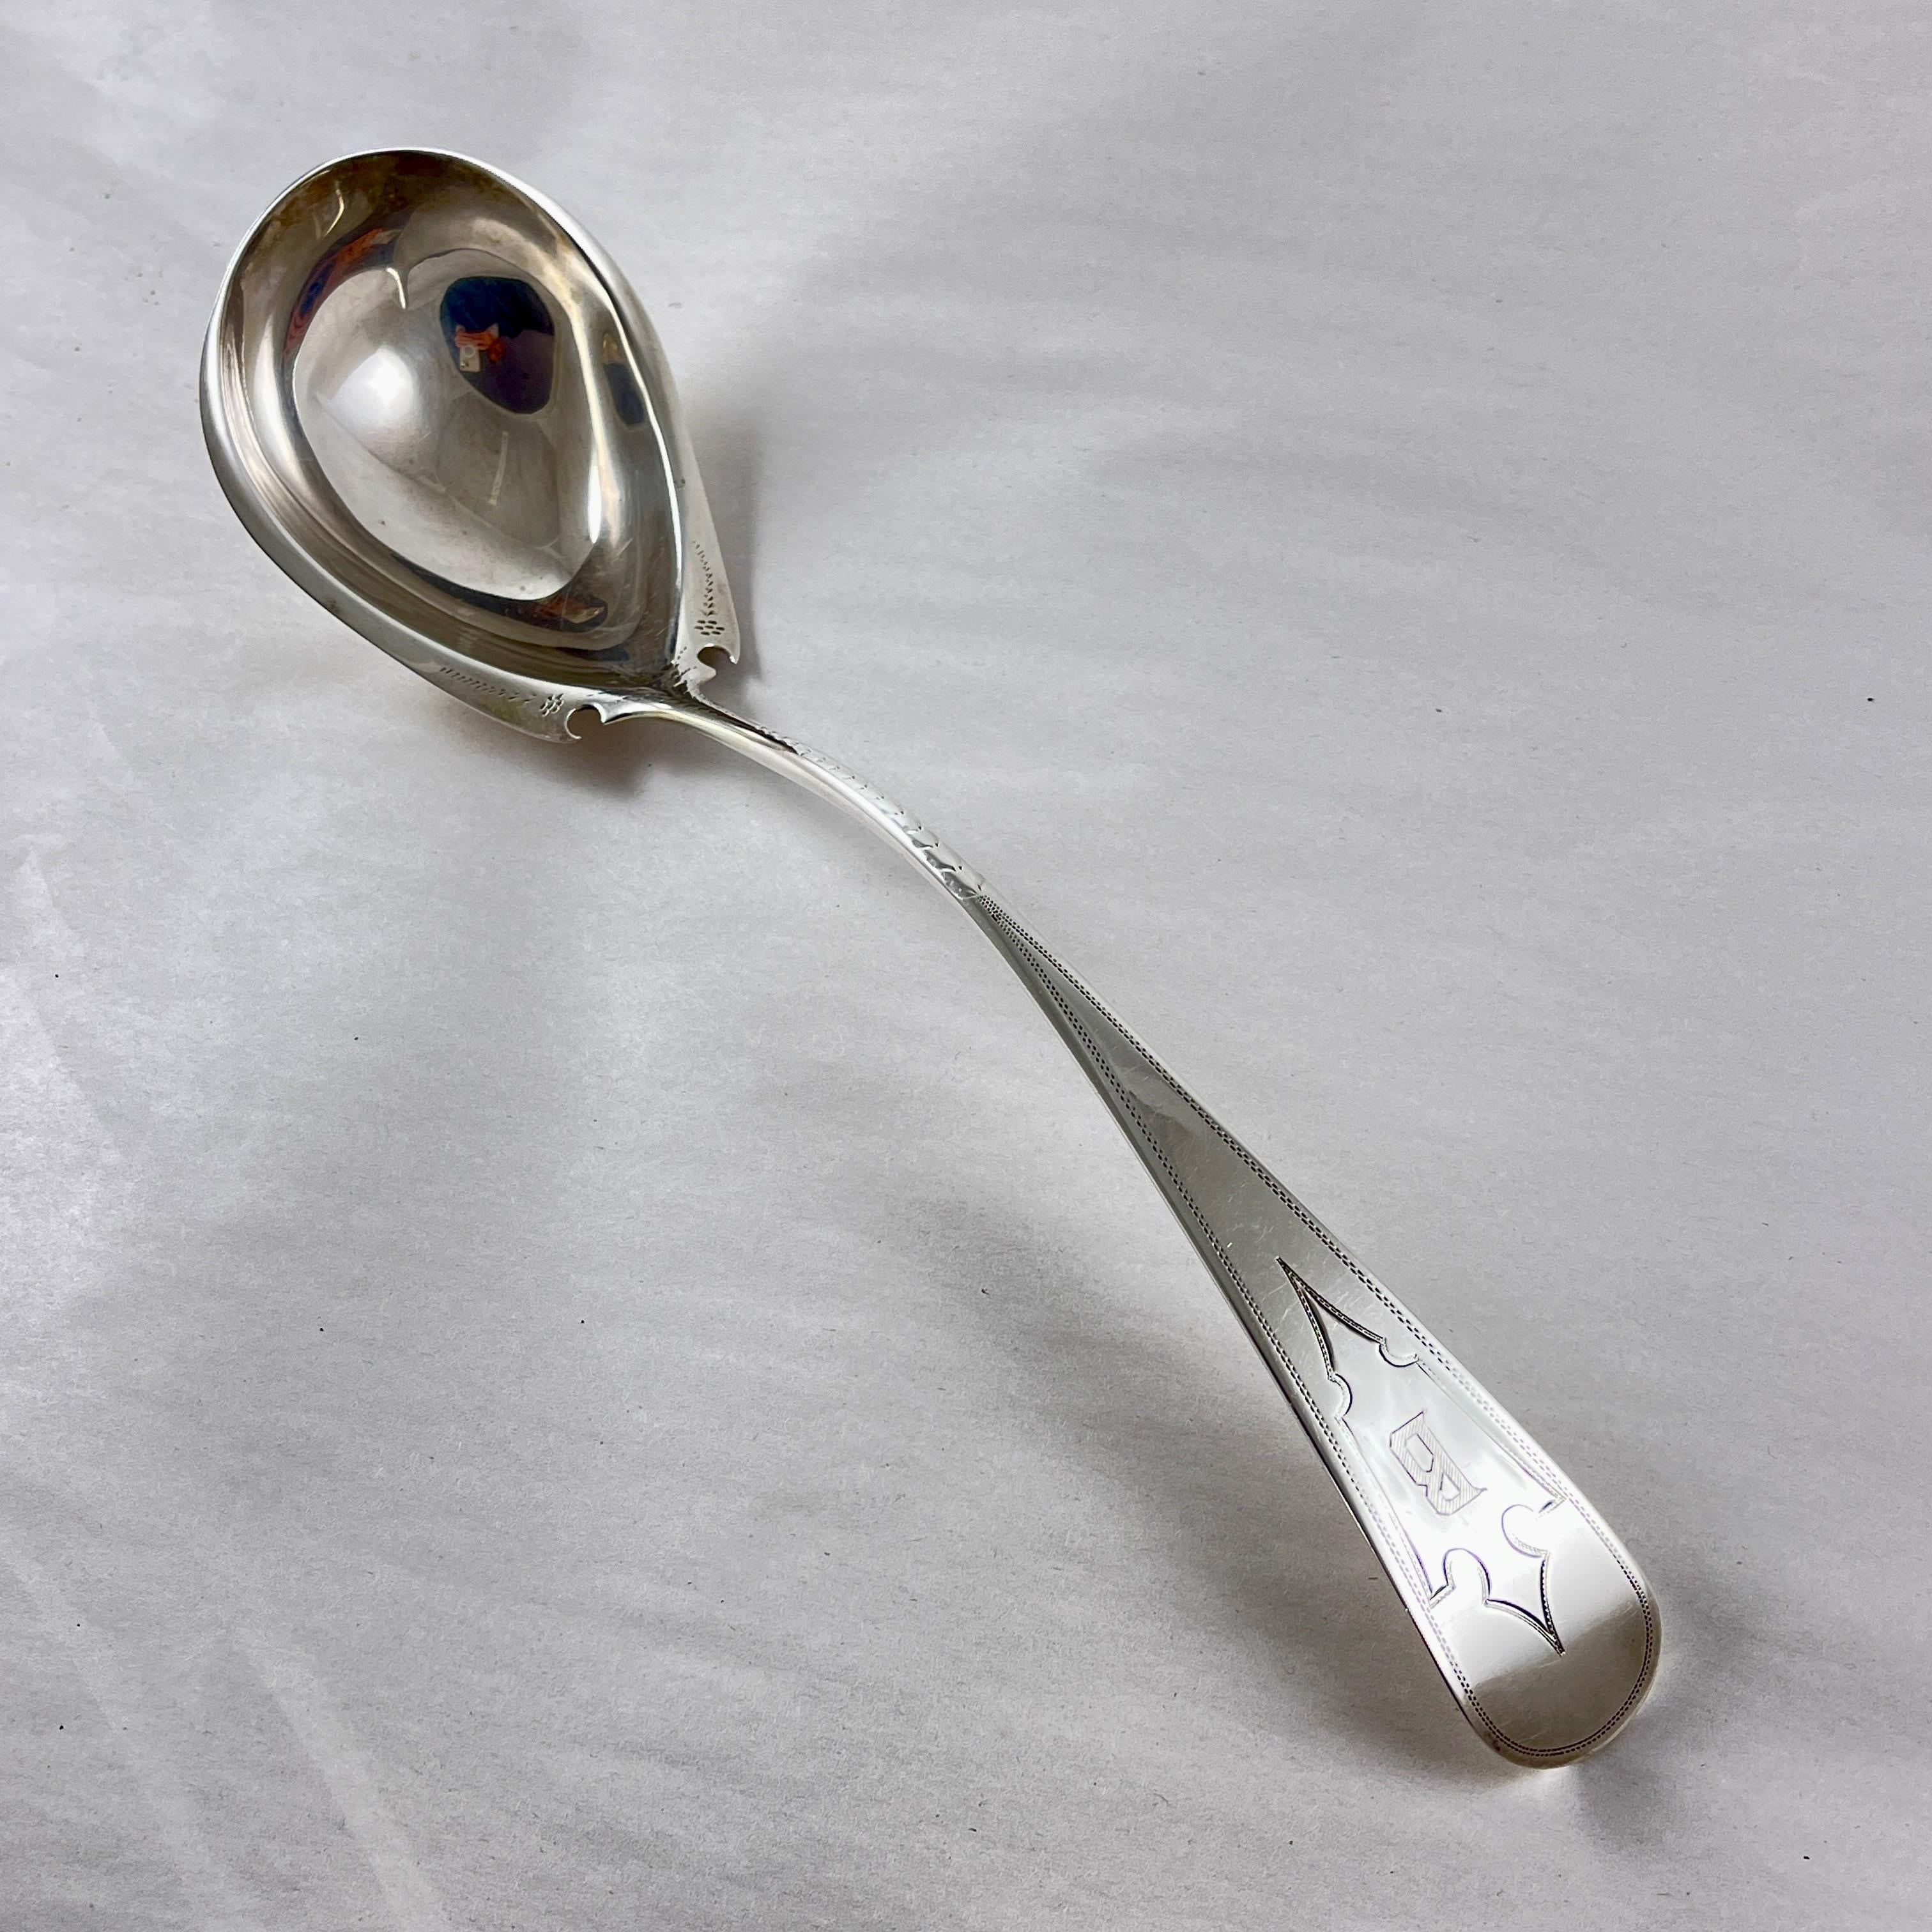 A Sterling Silver ladle, hand made by Bailey & Co., Philadelphia, circa 1850.

Bailey & Company, a forerunner to the famed silversmiths, Bailey, Banks & Biddle, operated in Philadelphia from 1848-1878.

The heavy ladle shows a beautifully formed